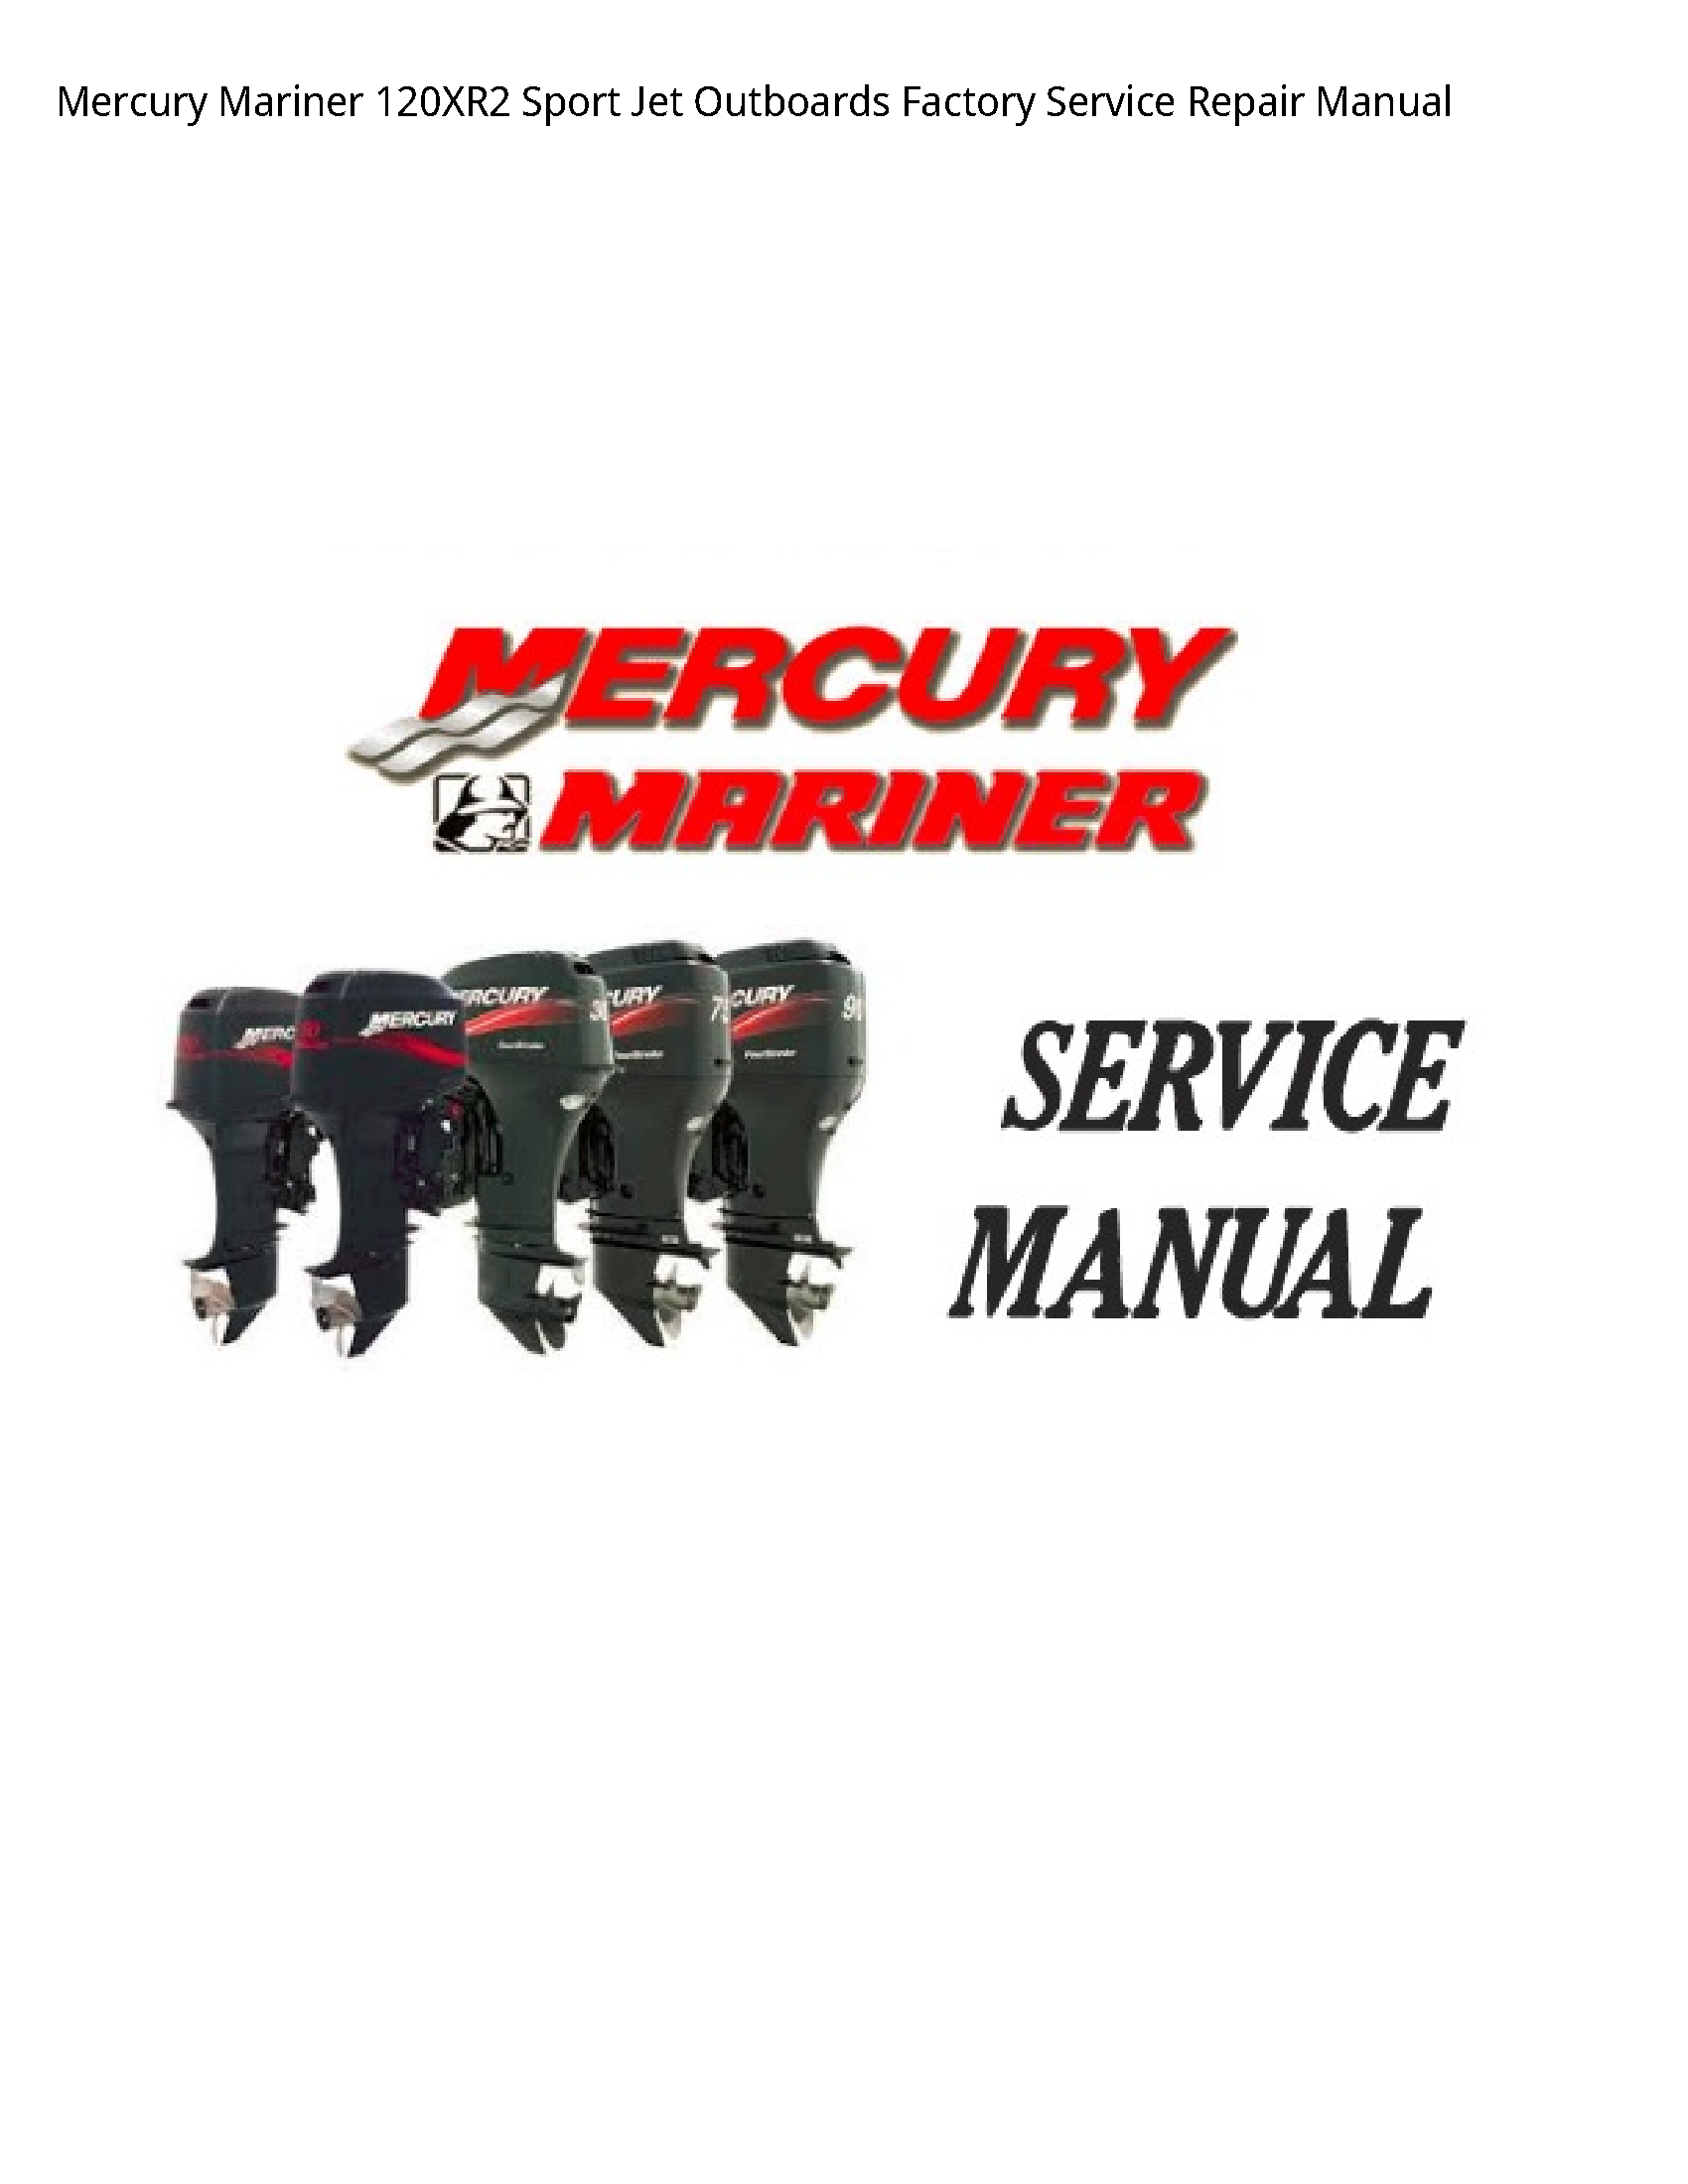 Mercury Mariner 120XR2 Sport Jet Outboards Factory manual